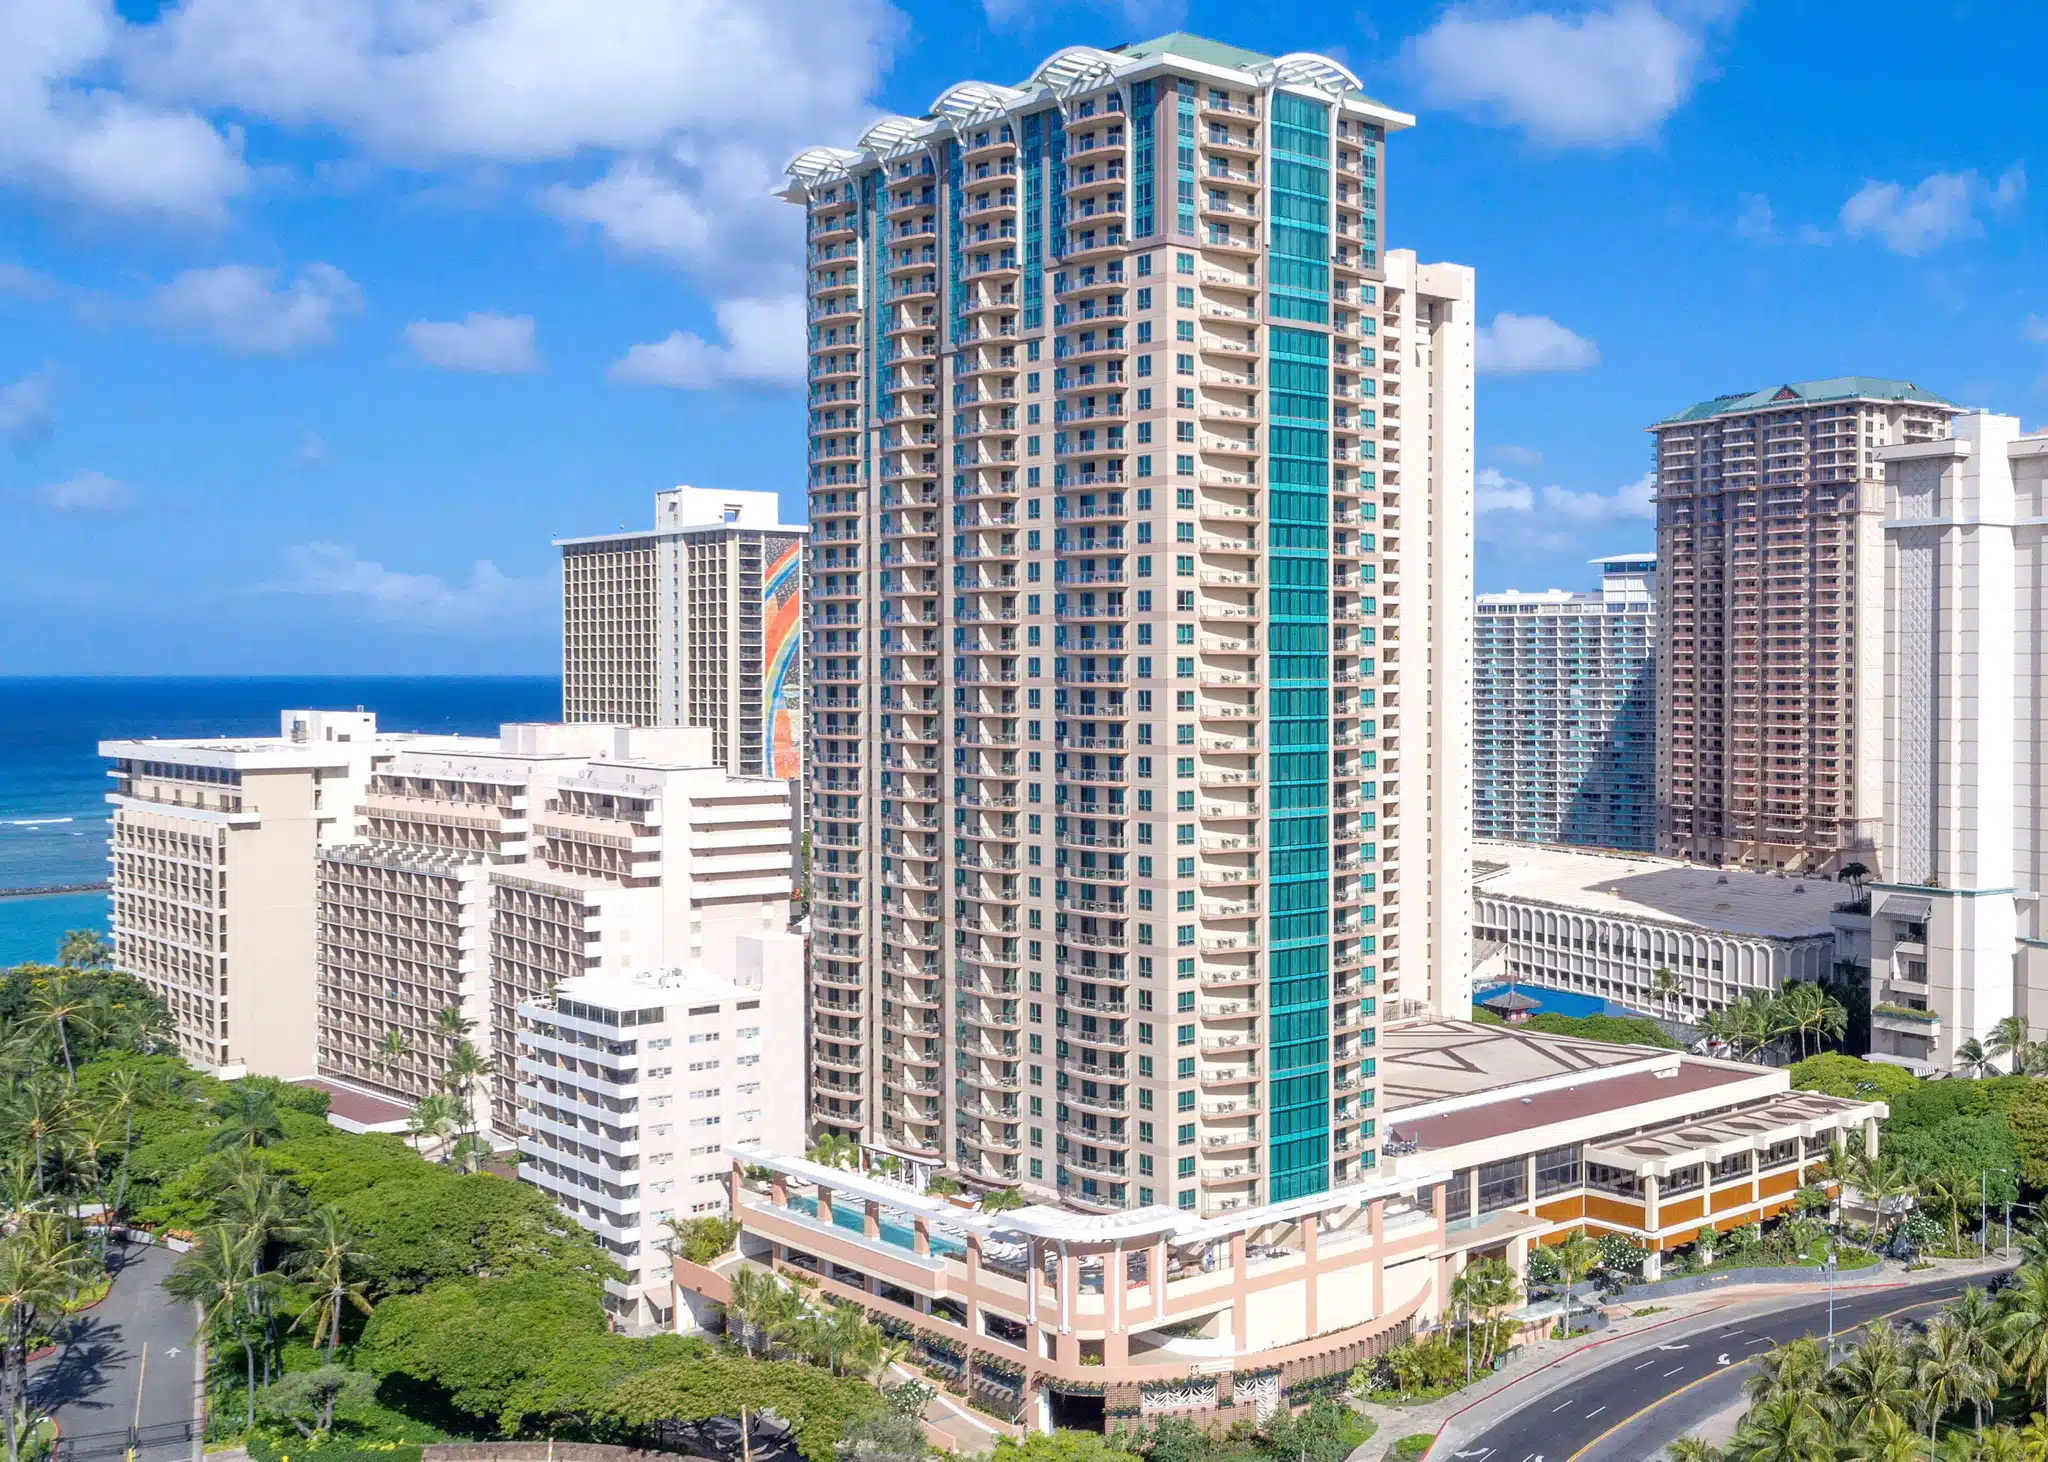 The Grand Islander By Hilton Grand Vacations is a Hotel located in the city of Honolulu on Oahu, Hawaii